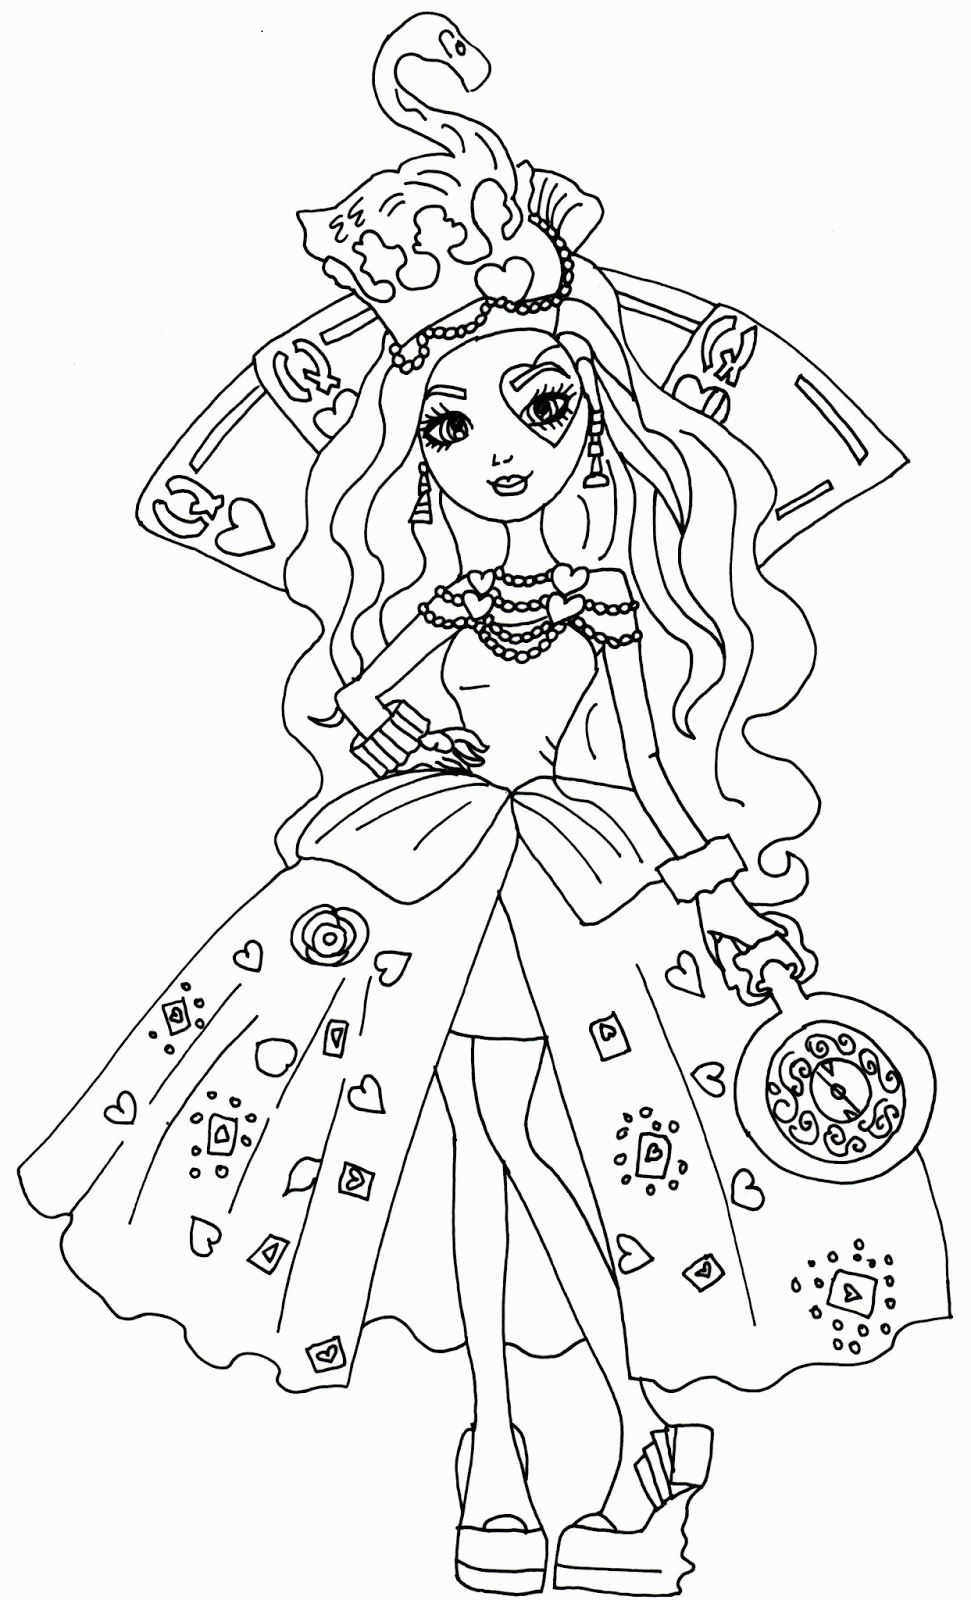 Free Printable Ever After High Coloring Pages: Lizzie Hearts Way